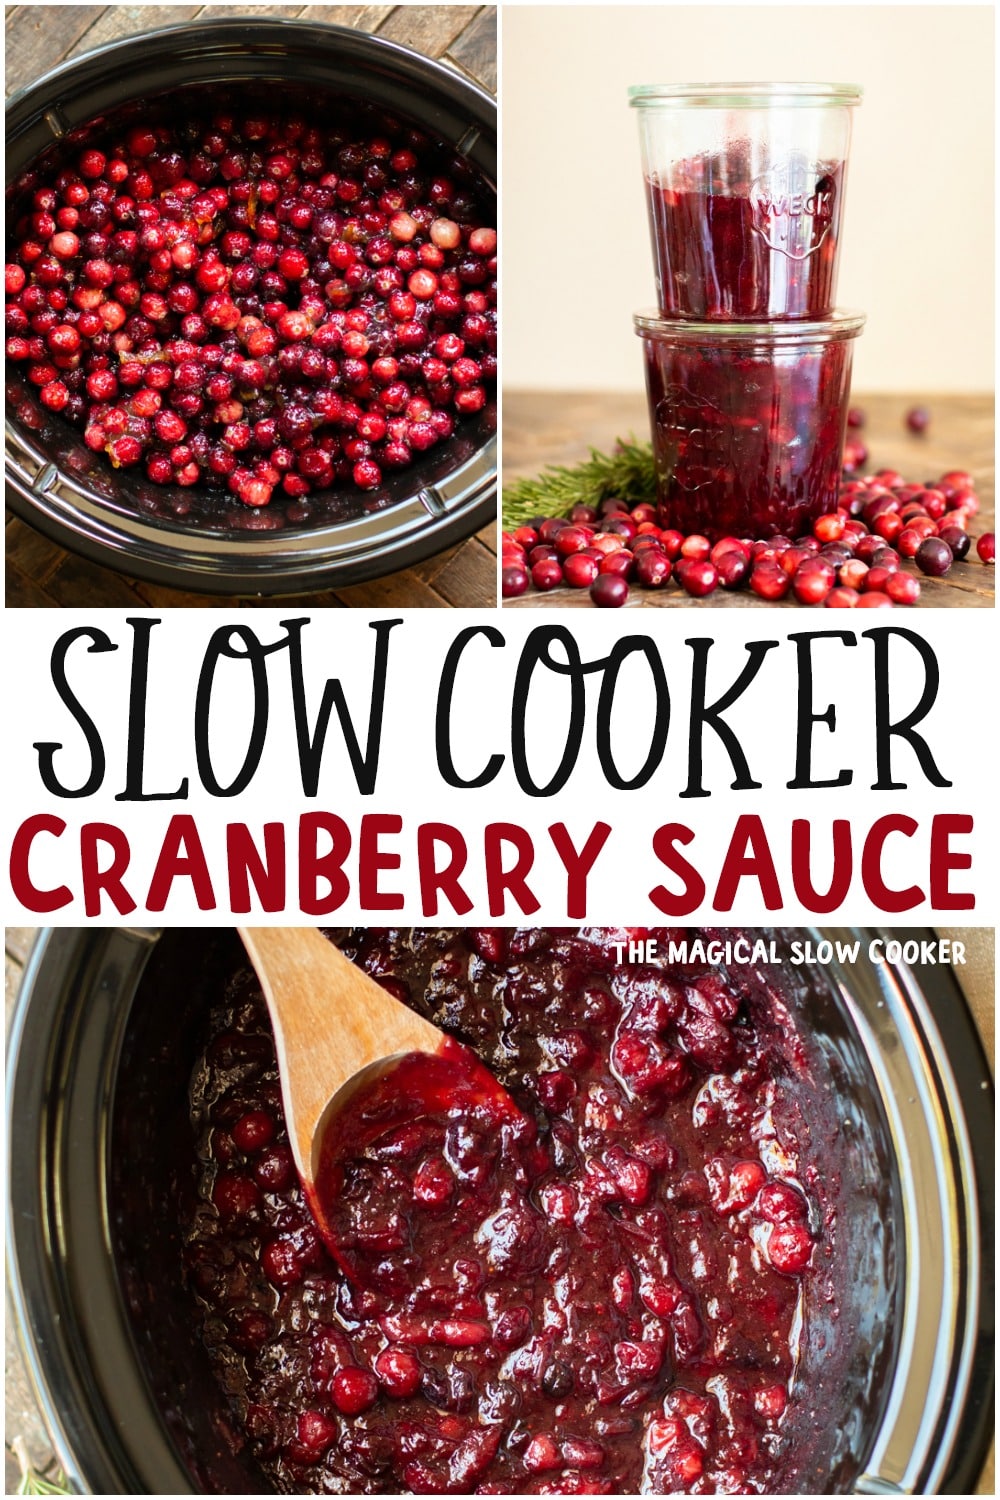 Slow Cooker Cranberry Sauce - The Magical Slow Cooker